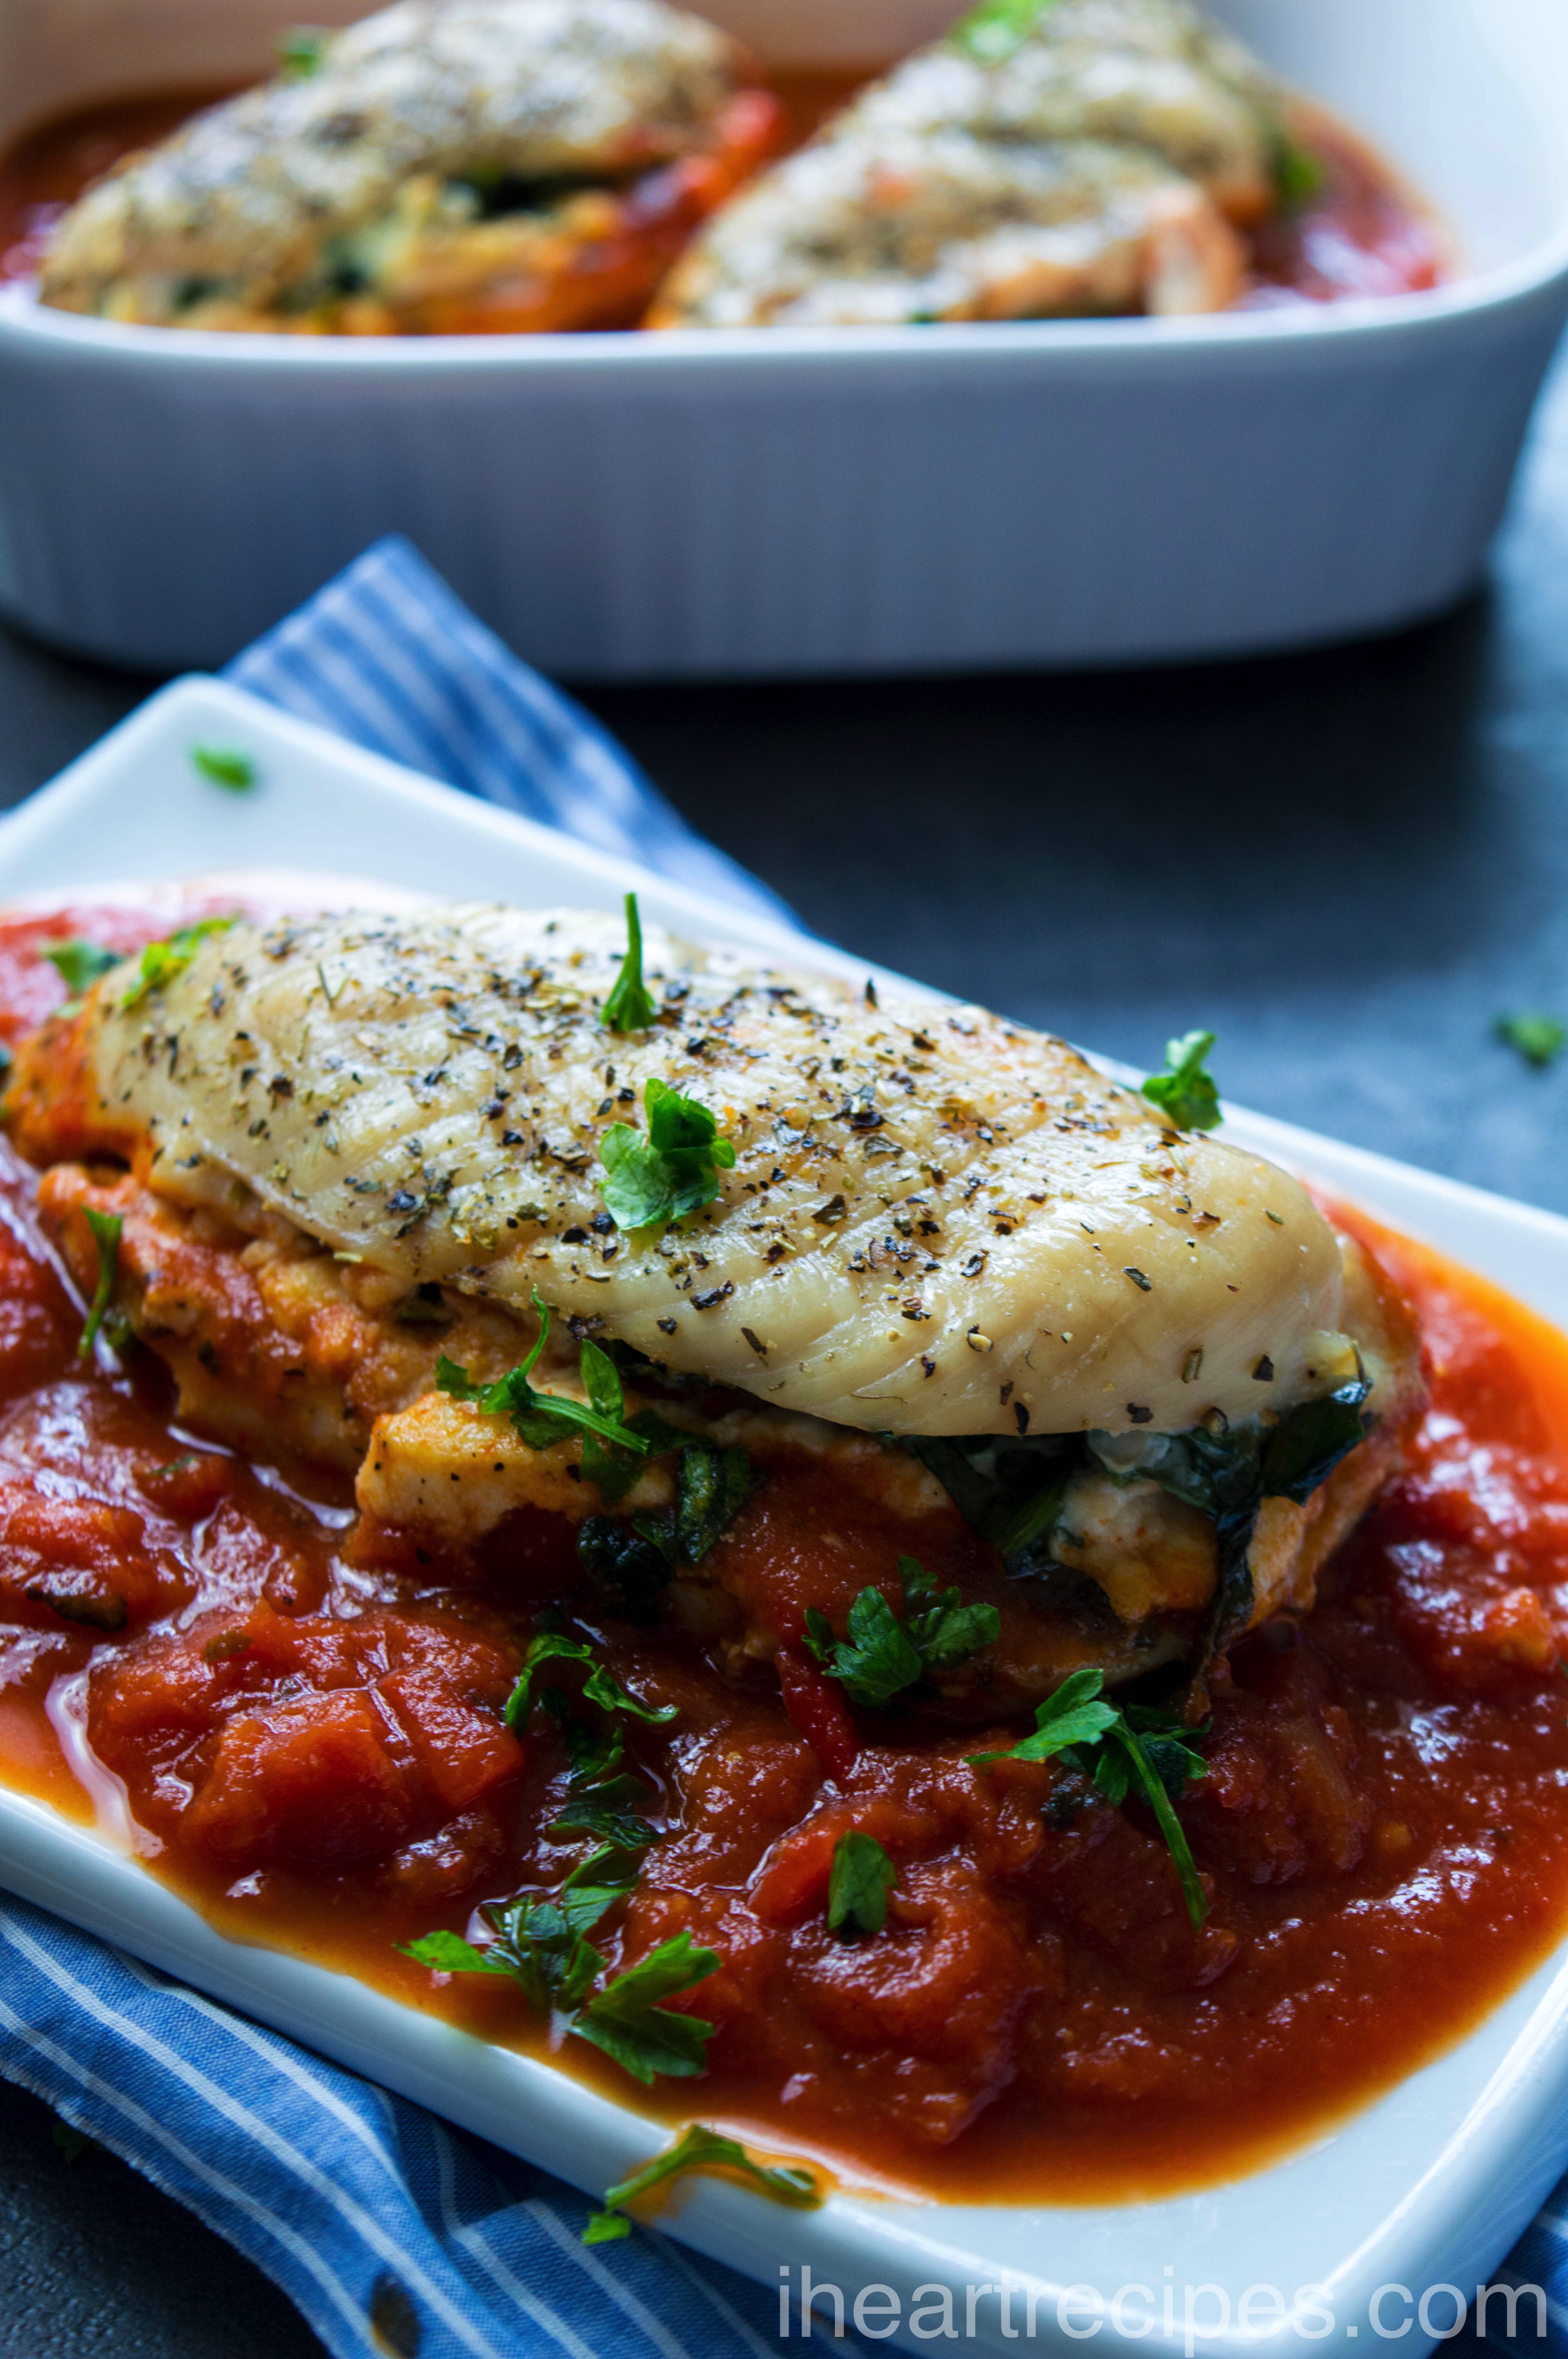 Creamy ricotta cheese and tender spinach stuffed into juicy chicken breasts served on a bed of savory marinara and garnished with bright green parsley. 